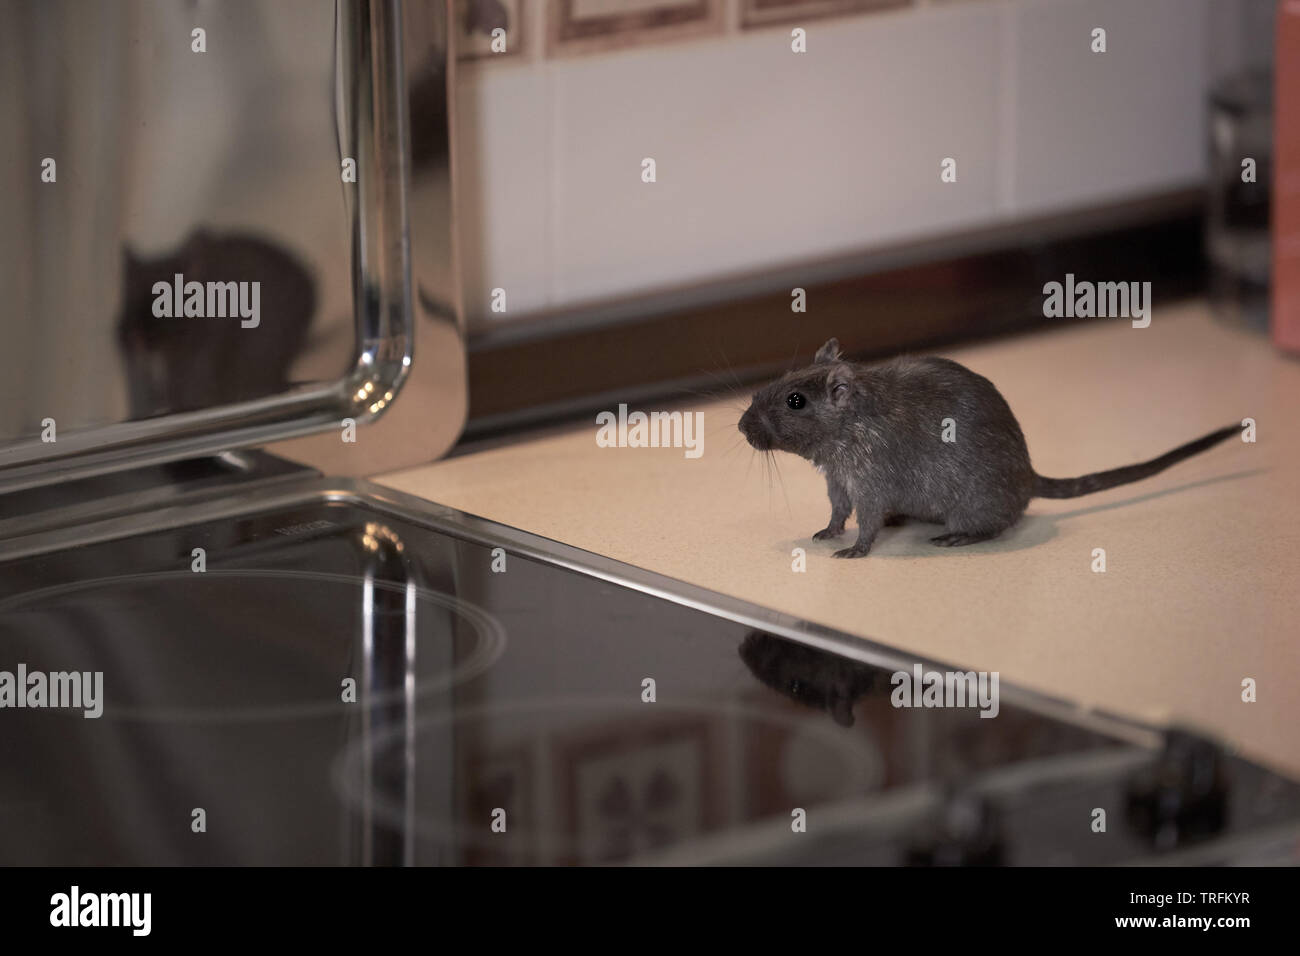 Rodent next to a ceramic hob and reflecting in a metal tray Stock Photo